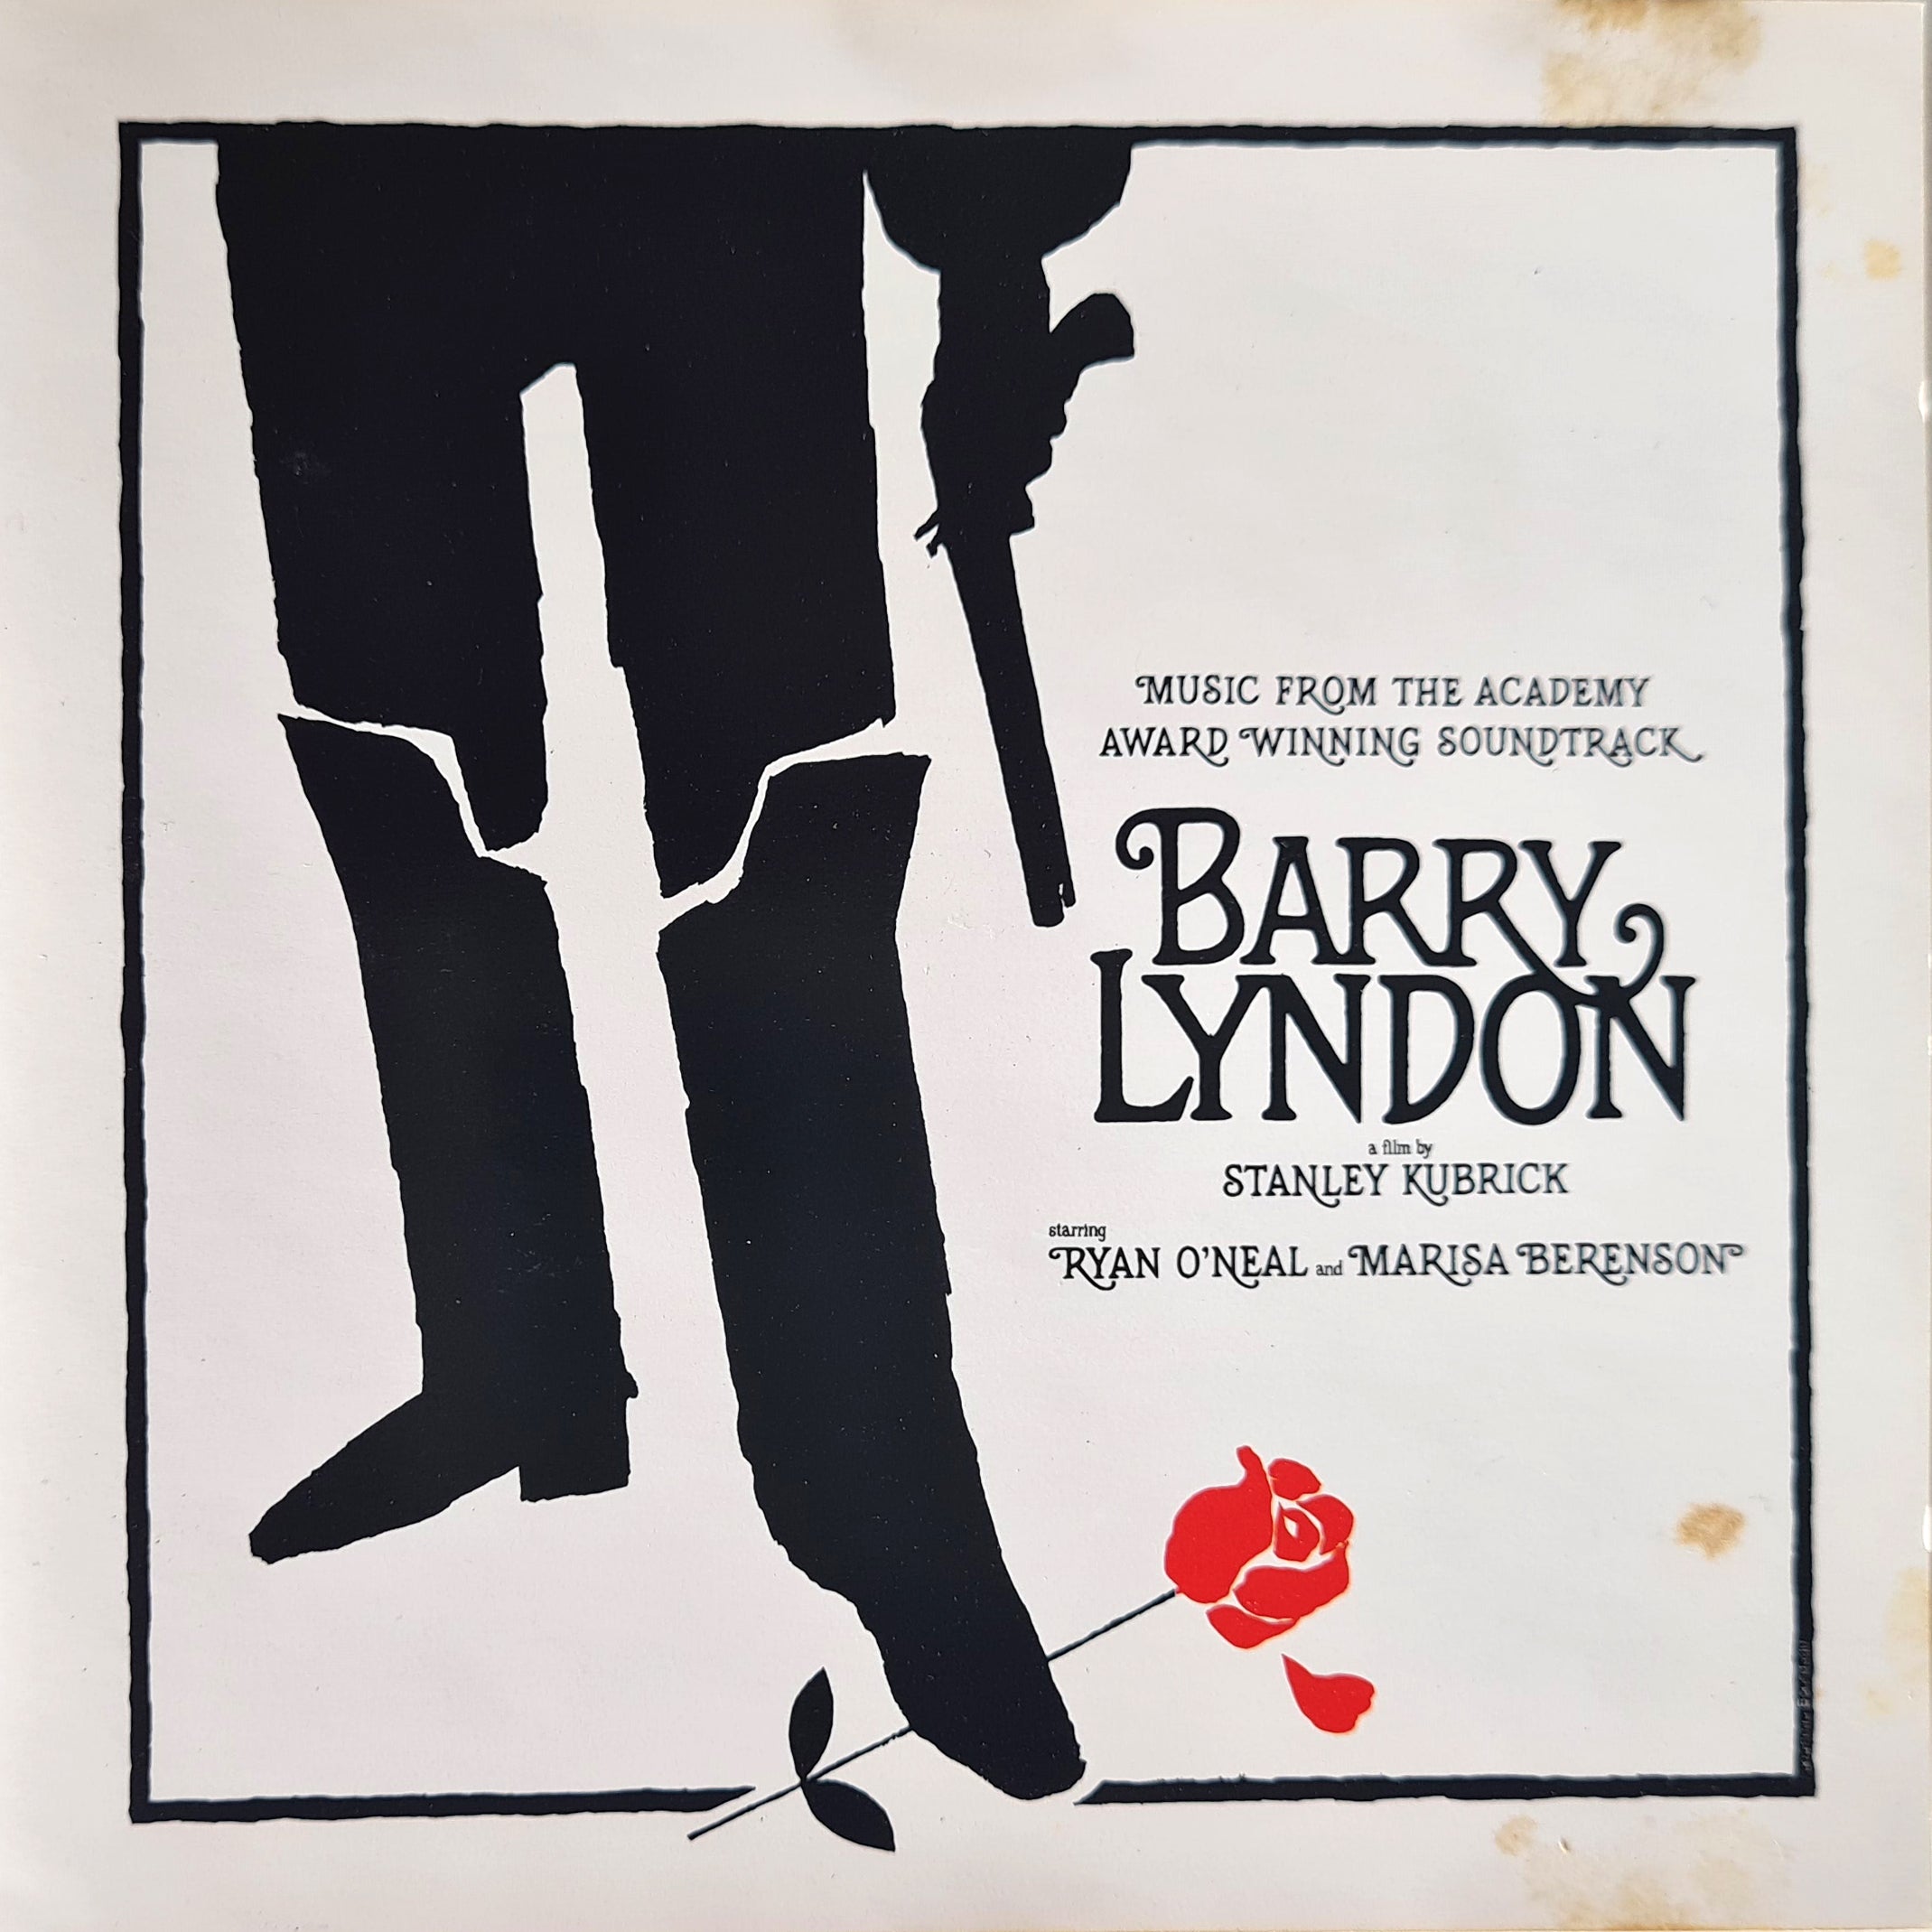 Barry Lyndon -  Music from the Academy Award Winning Soundtrack (CD)